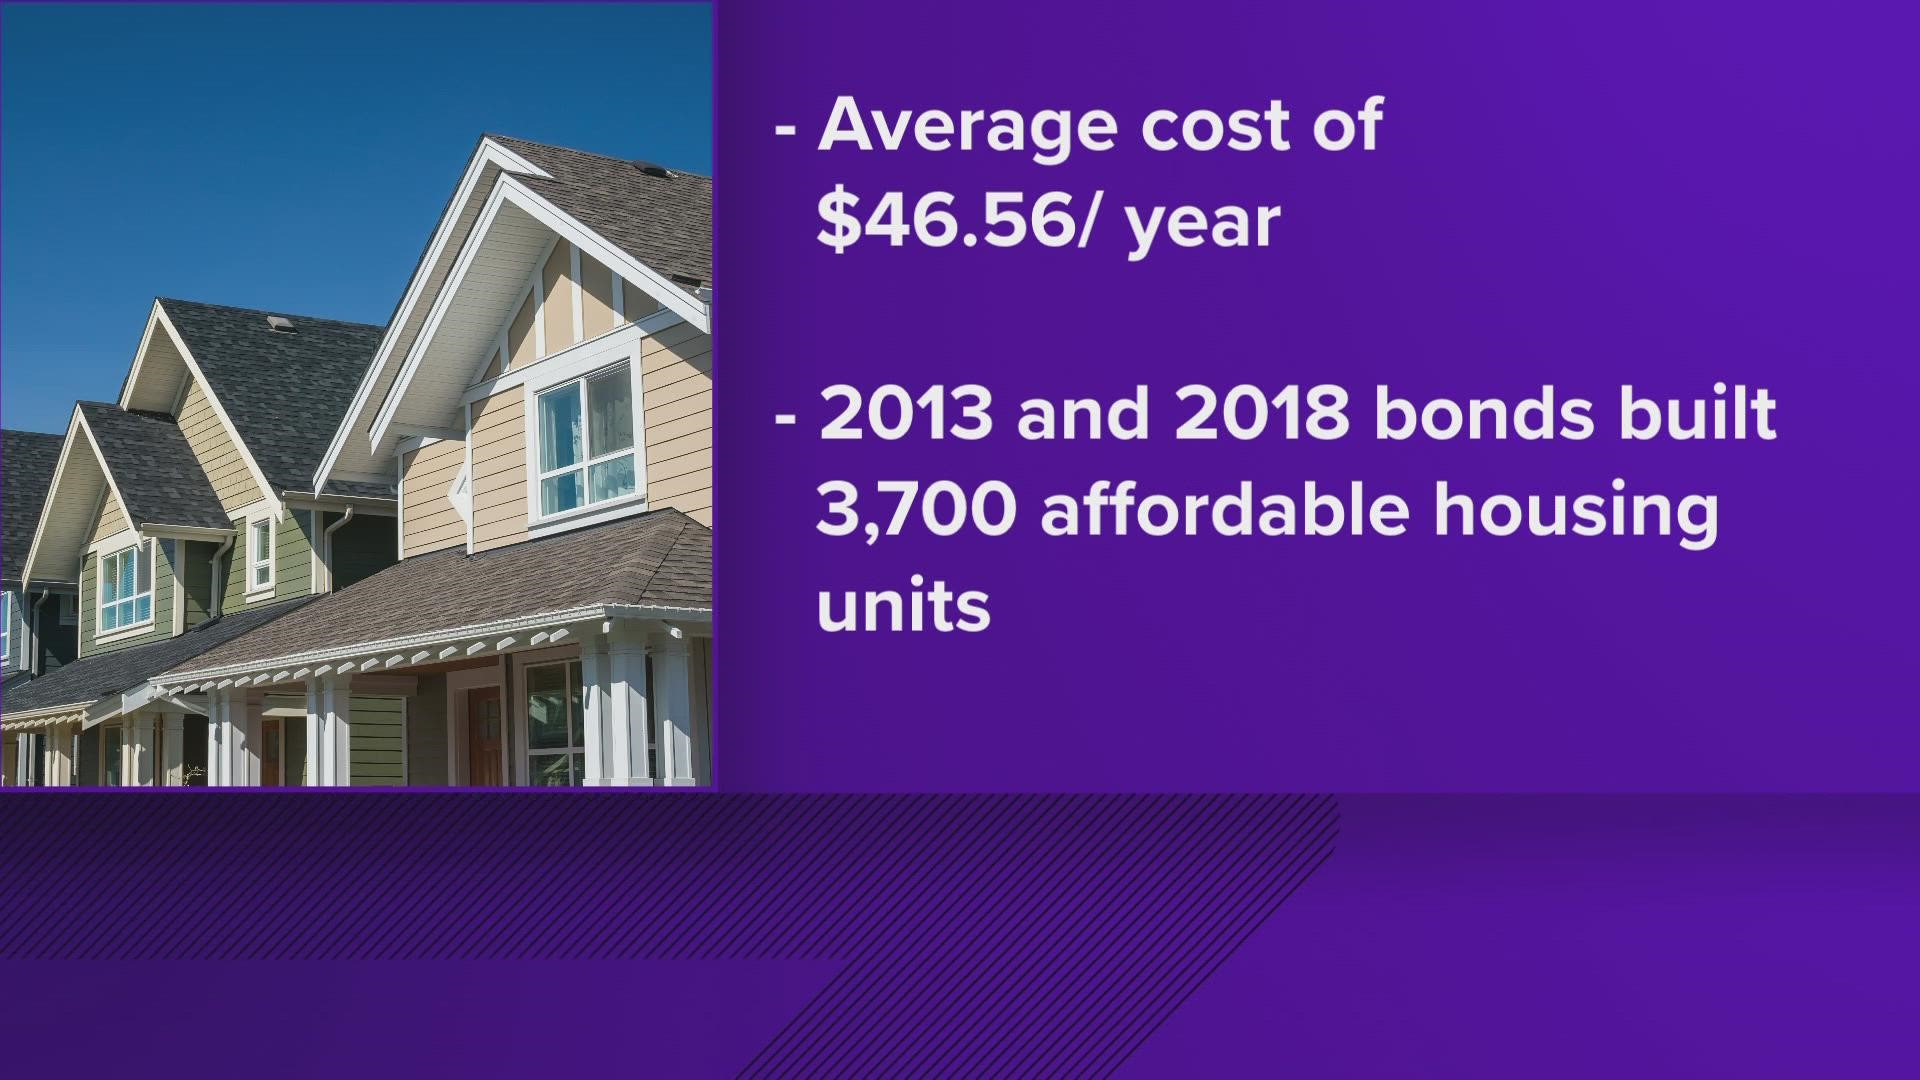 The $350 million bond item was approved by the Austin City Council on Thursday.